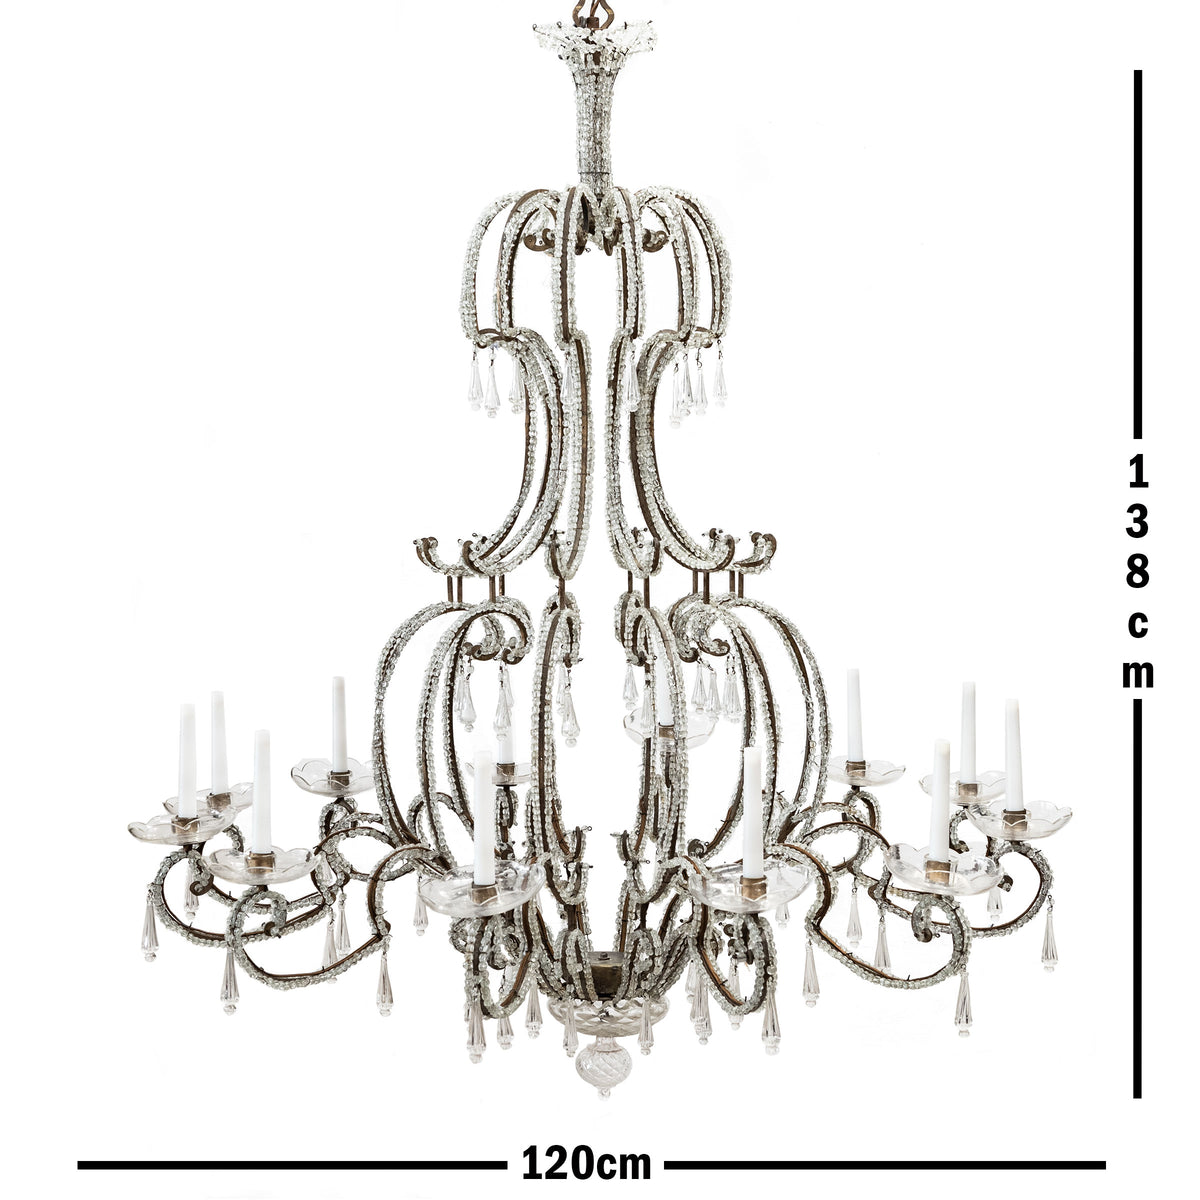 Large Reclaimed Beaded Crystal Murano Glass Chandelier | The Architectural Forum